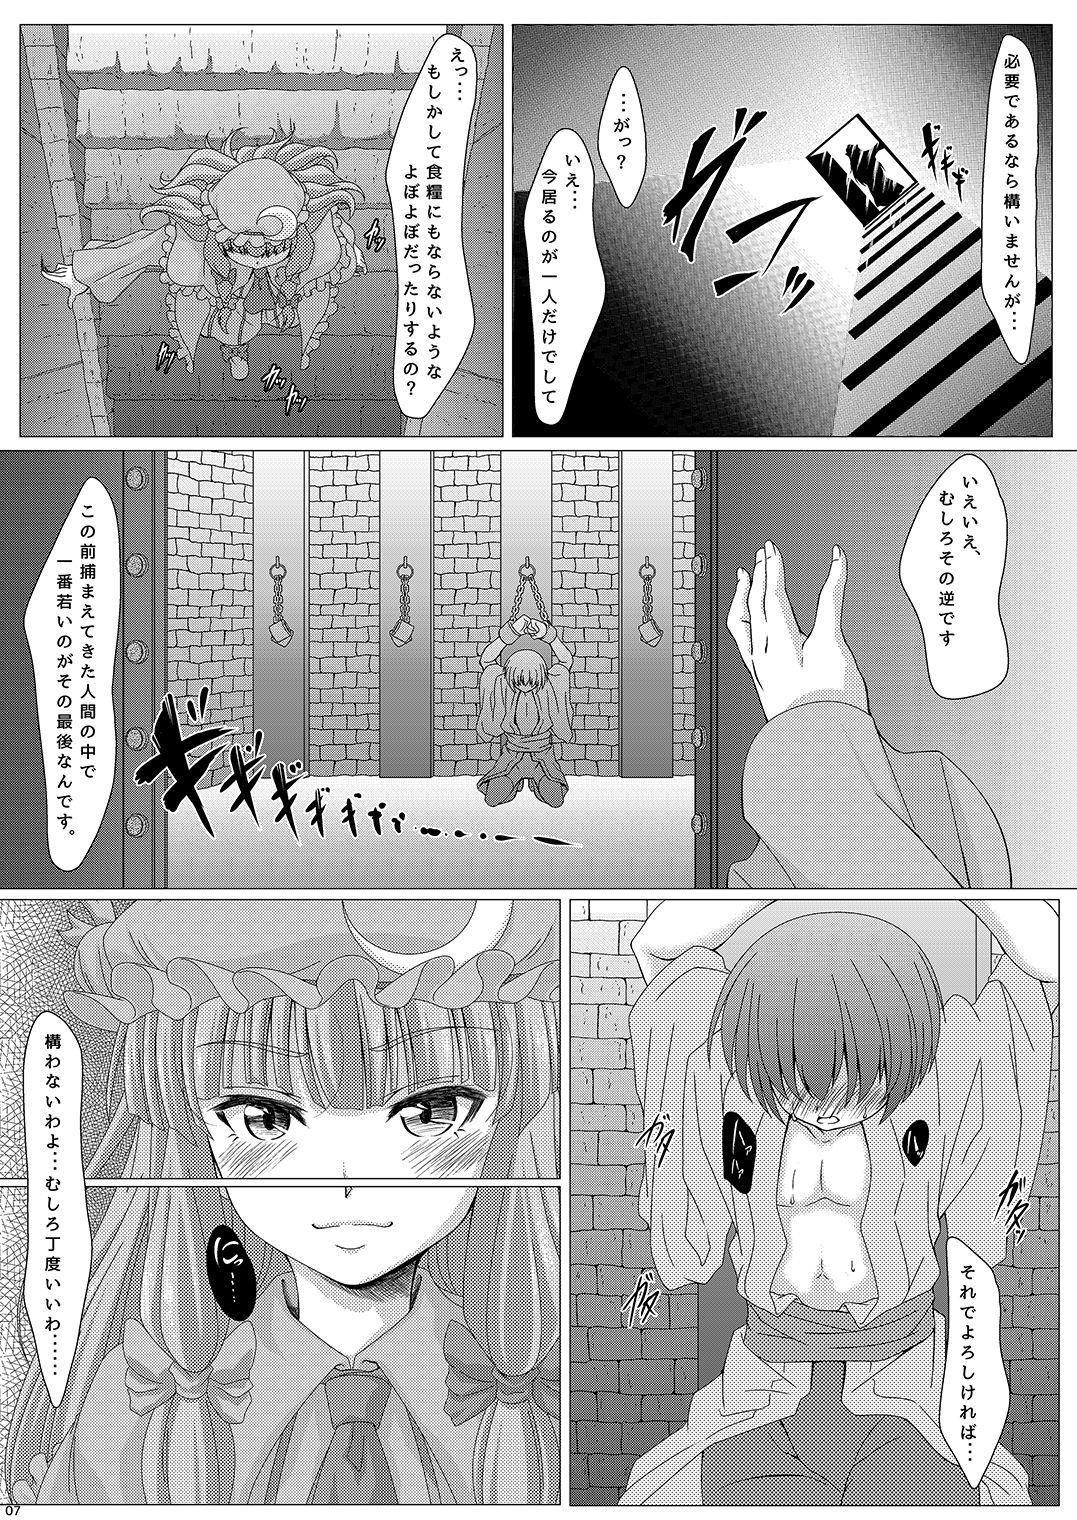 Thylinh Touhouhimekamiden Ni - Touhou project Spreading - Page 6